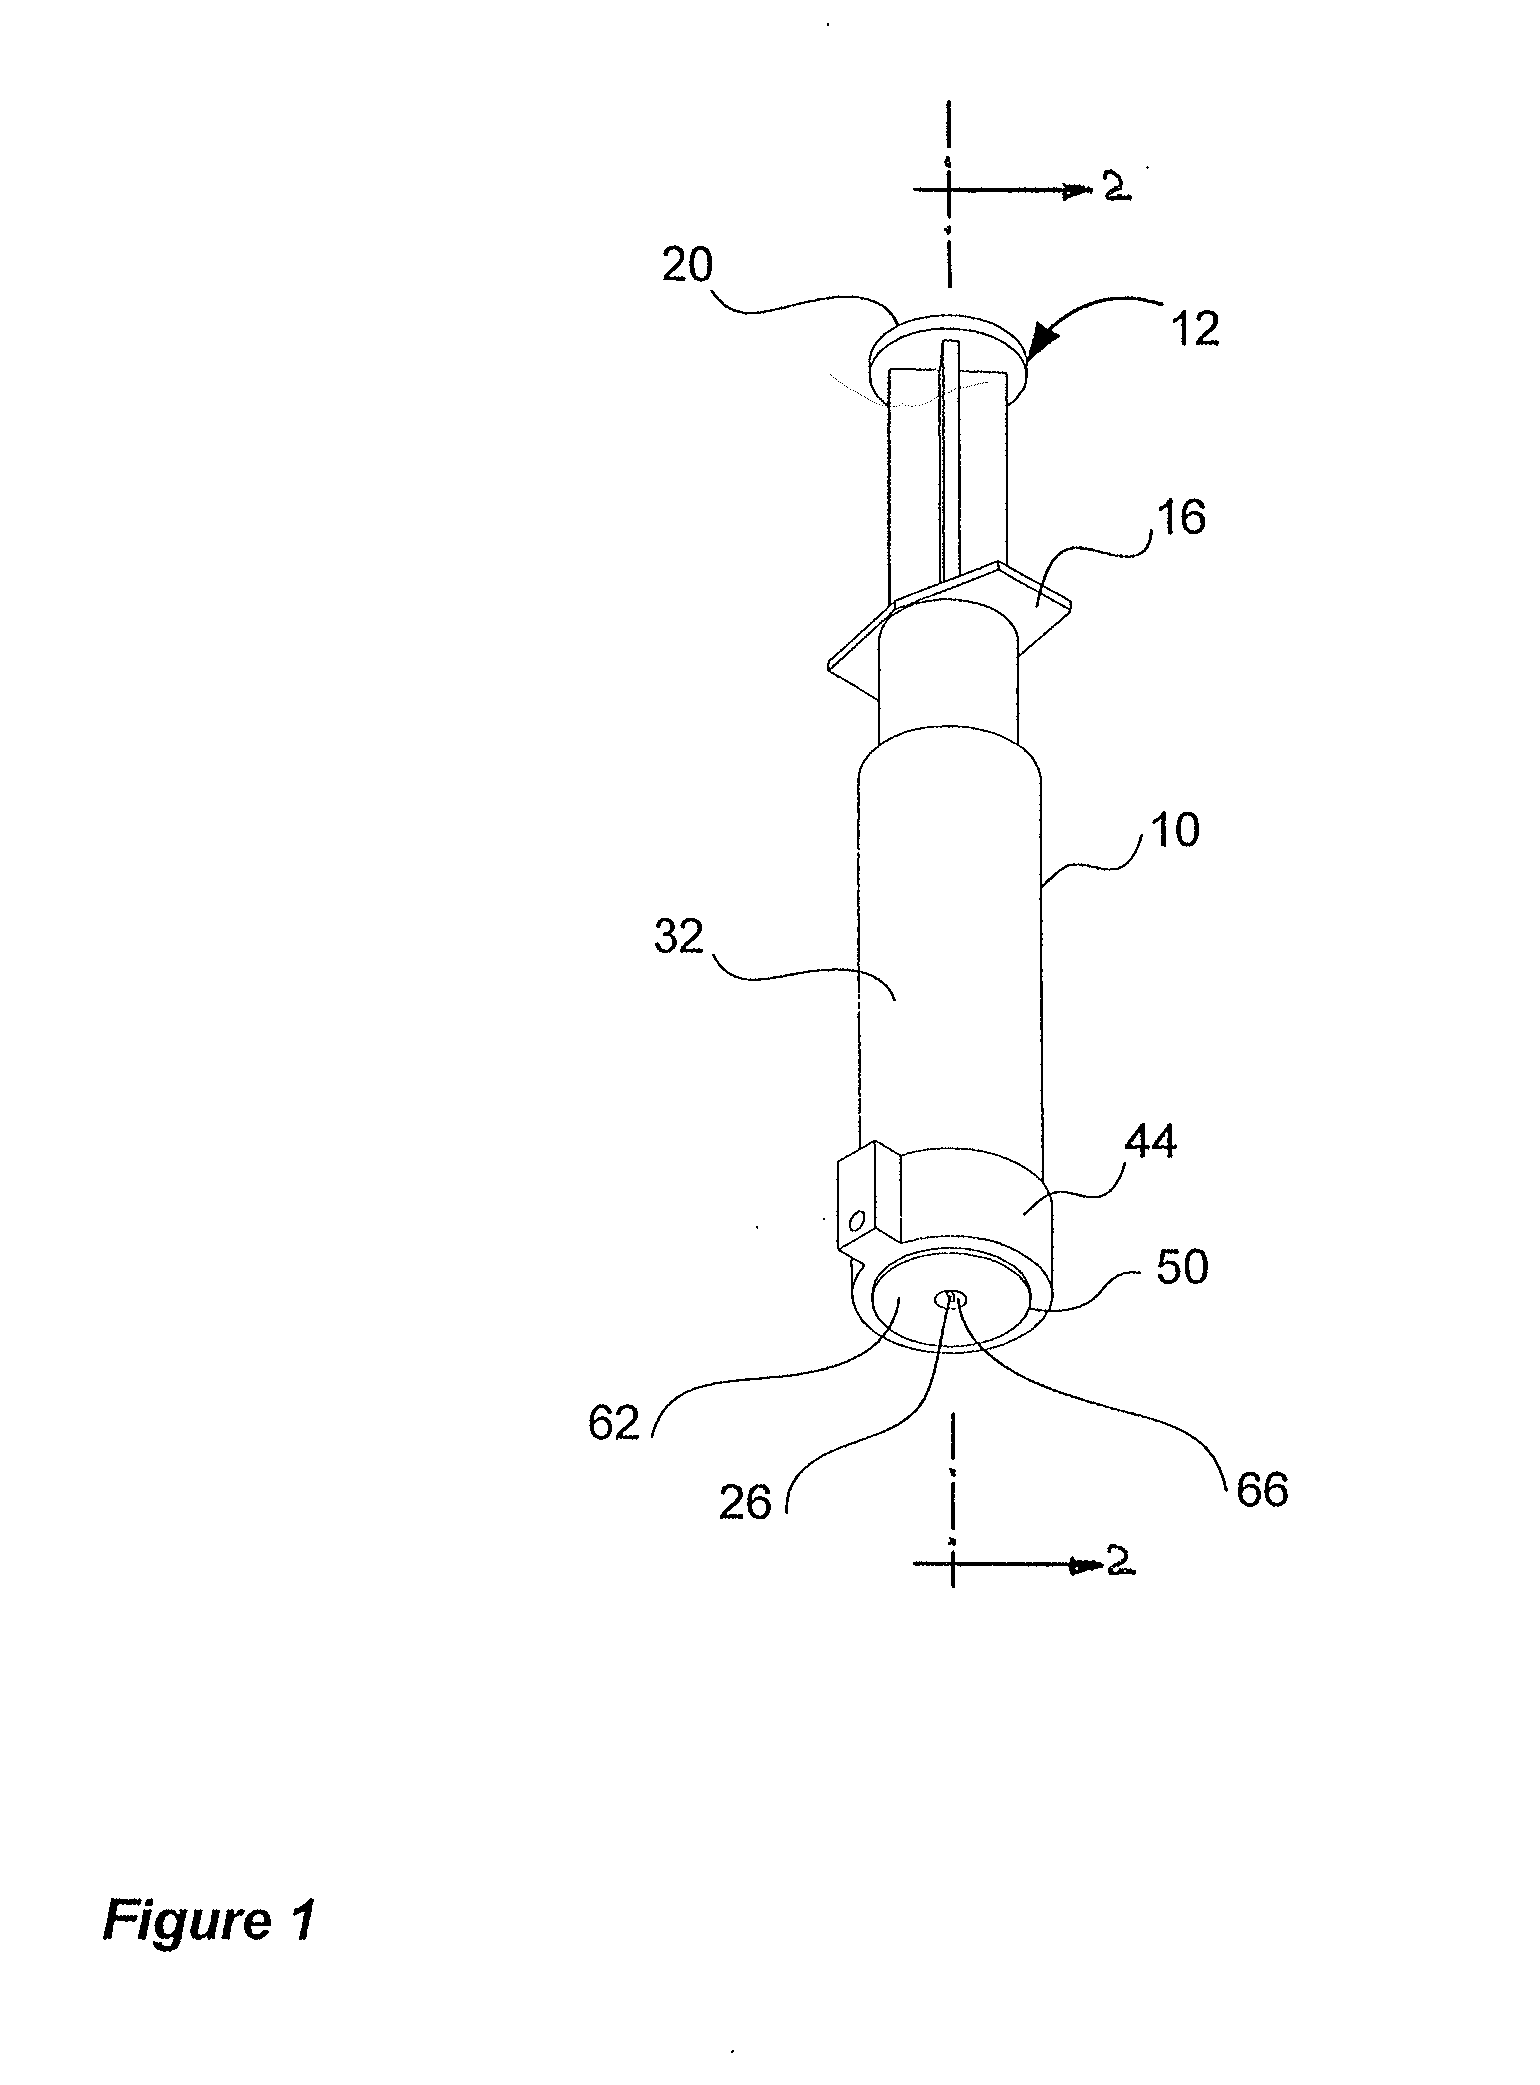 Skin cooling apparatus and method